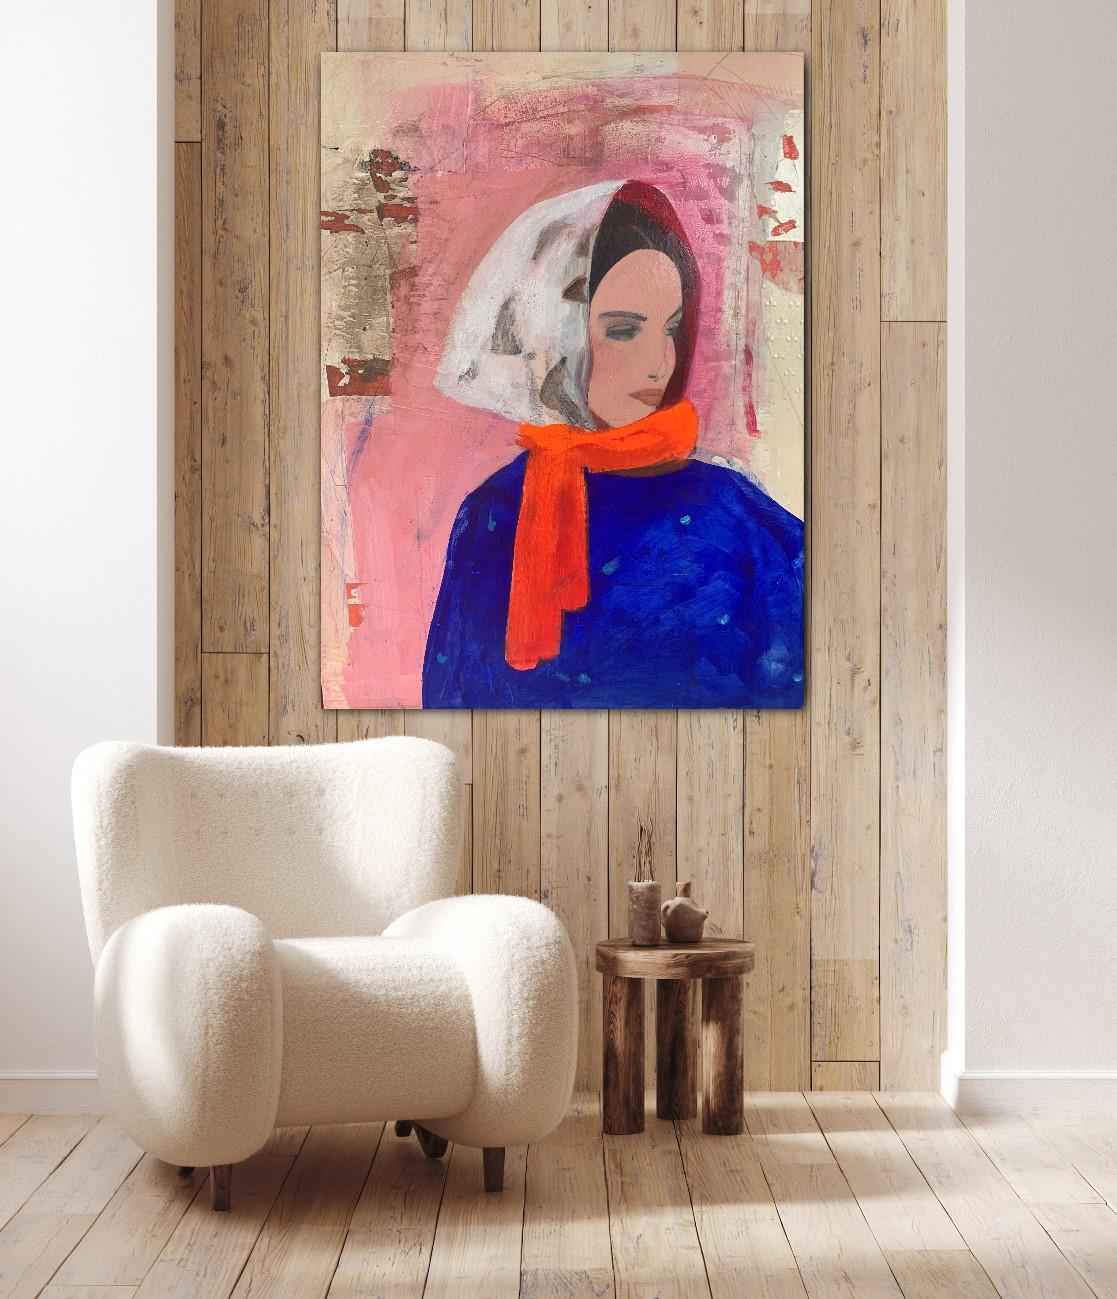 Woman in Blue with Headscarf - Bright Colour Portrait, Women, Texture, Face - Painting by Nicolle Menegaldo